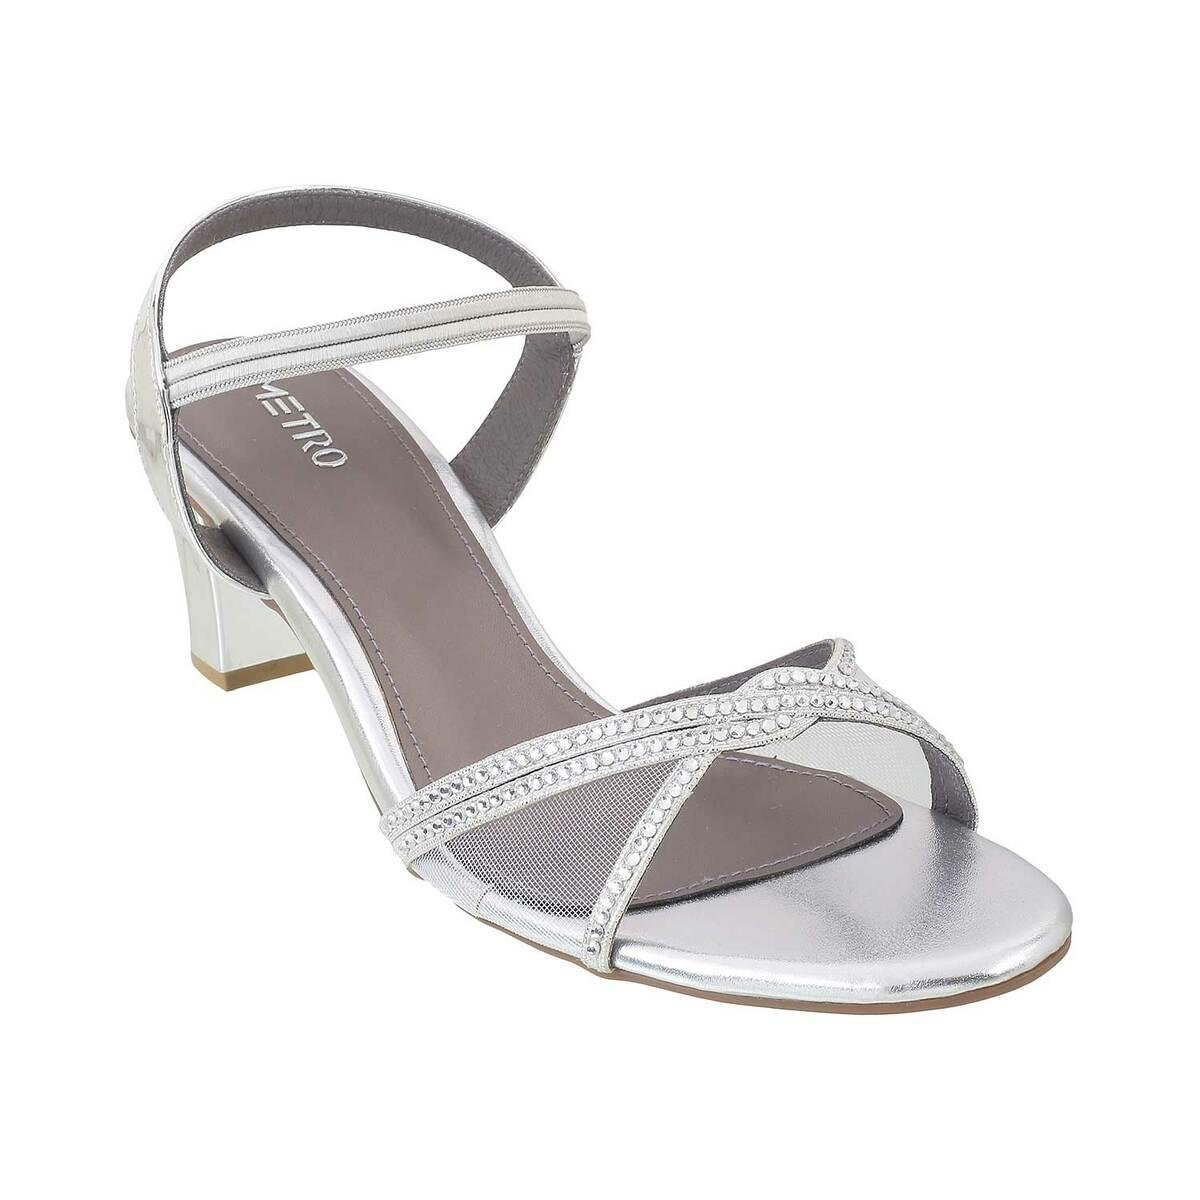 Amazon.com: Girls Low Heeled Shoe Dress Shoes Rhinestone Bows Low Heel  Princess Flower Wedding Party for Kids Arch Support Sandals (Silver, 37) :  Baby